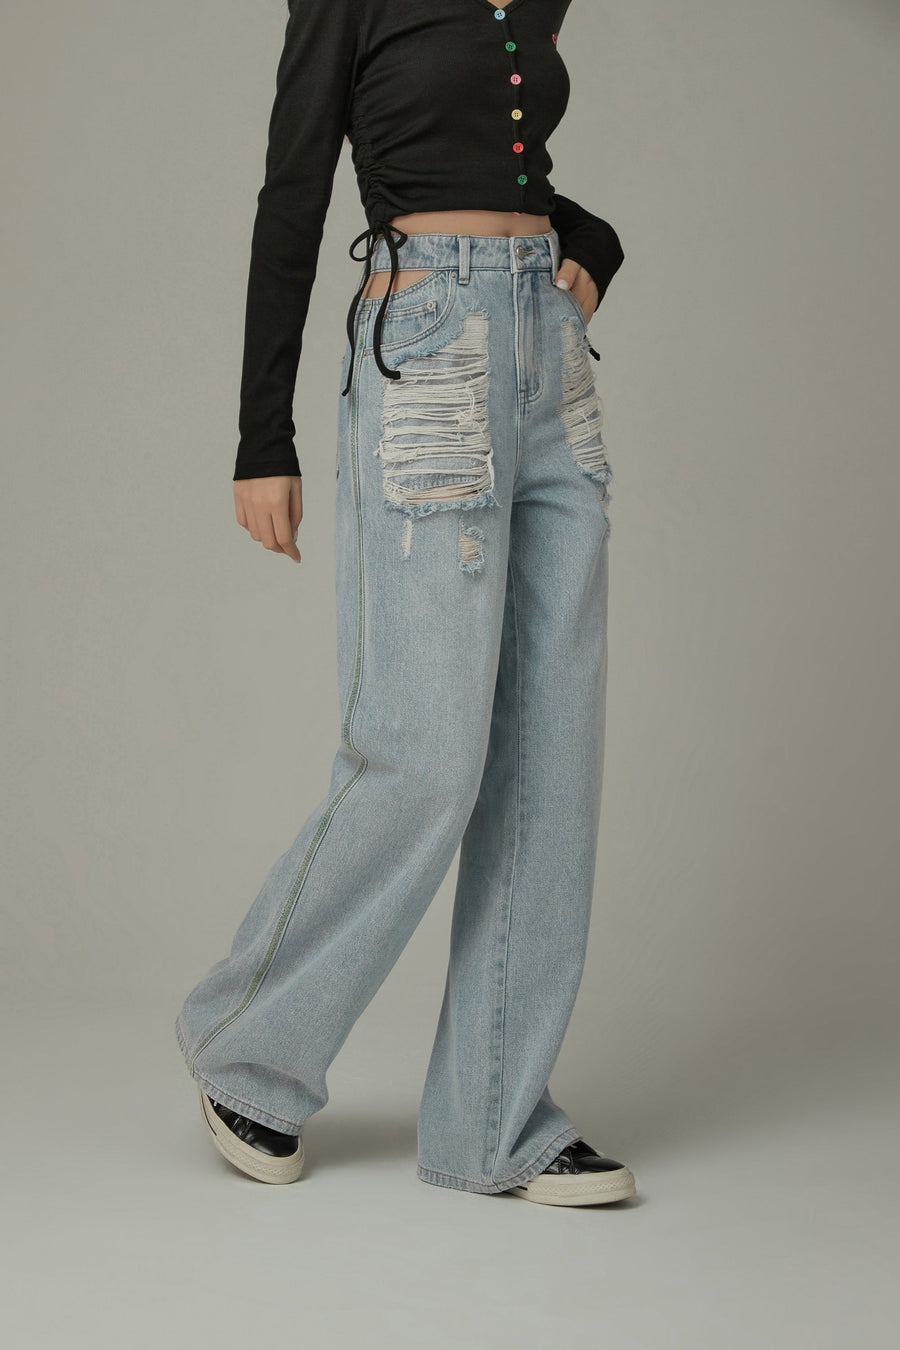 CHUU Side Slit Distressed Ripped Baggy Denim Jeans